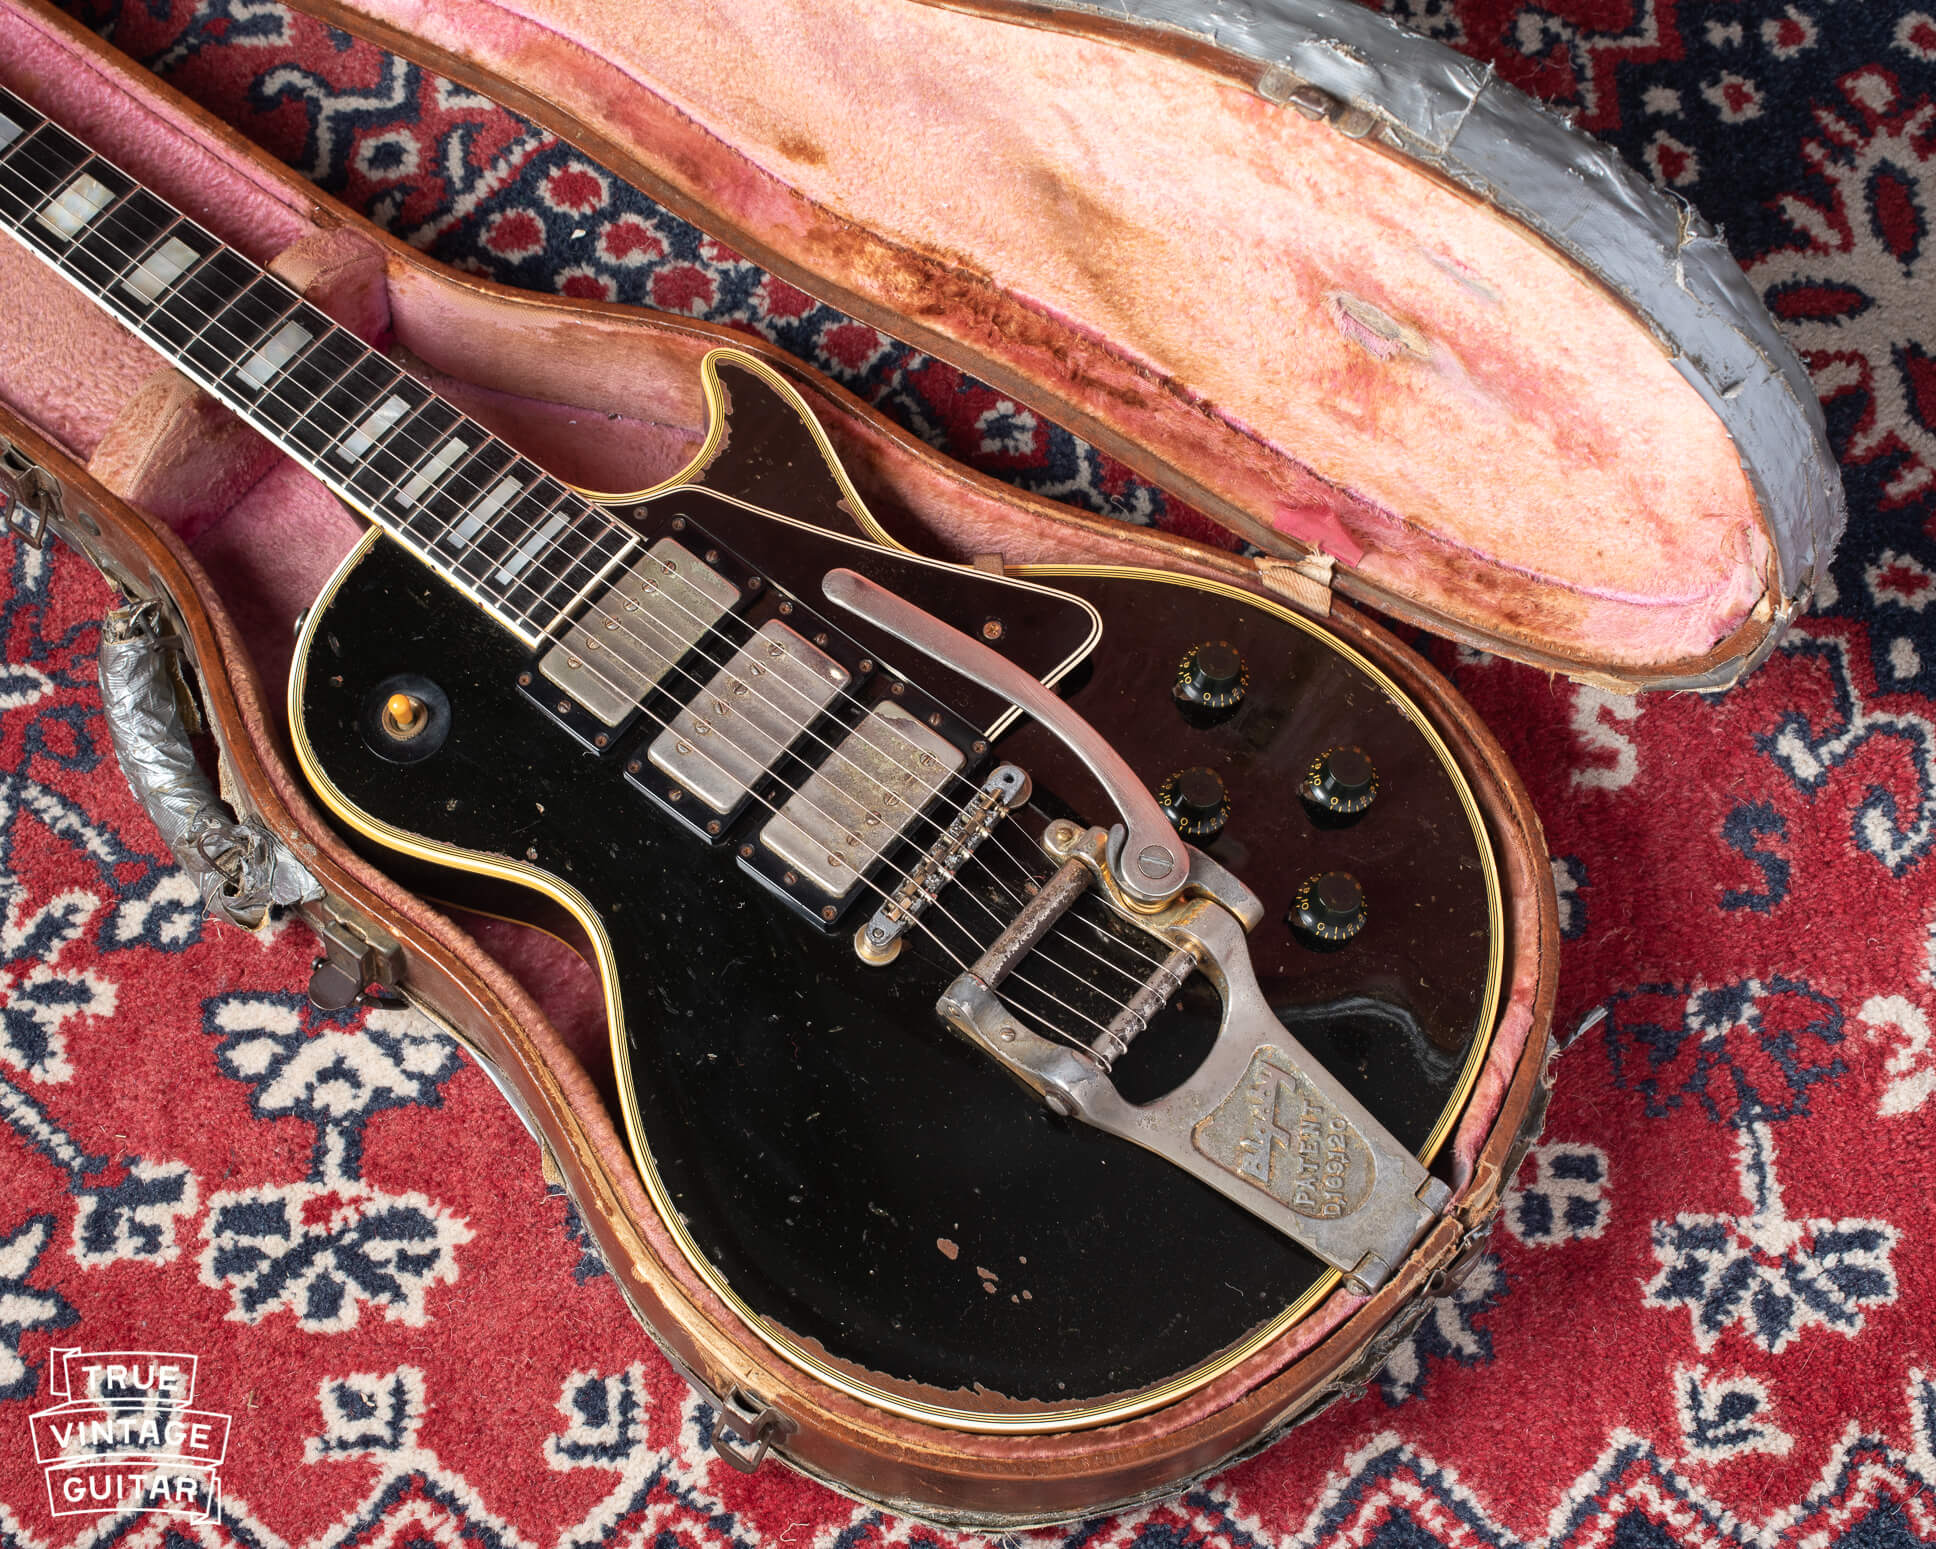 1960 Gibson Les Paul Custom Black with three gold humbucking pickups and Bigsby tailpiece